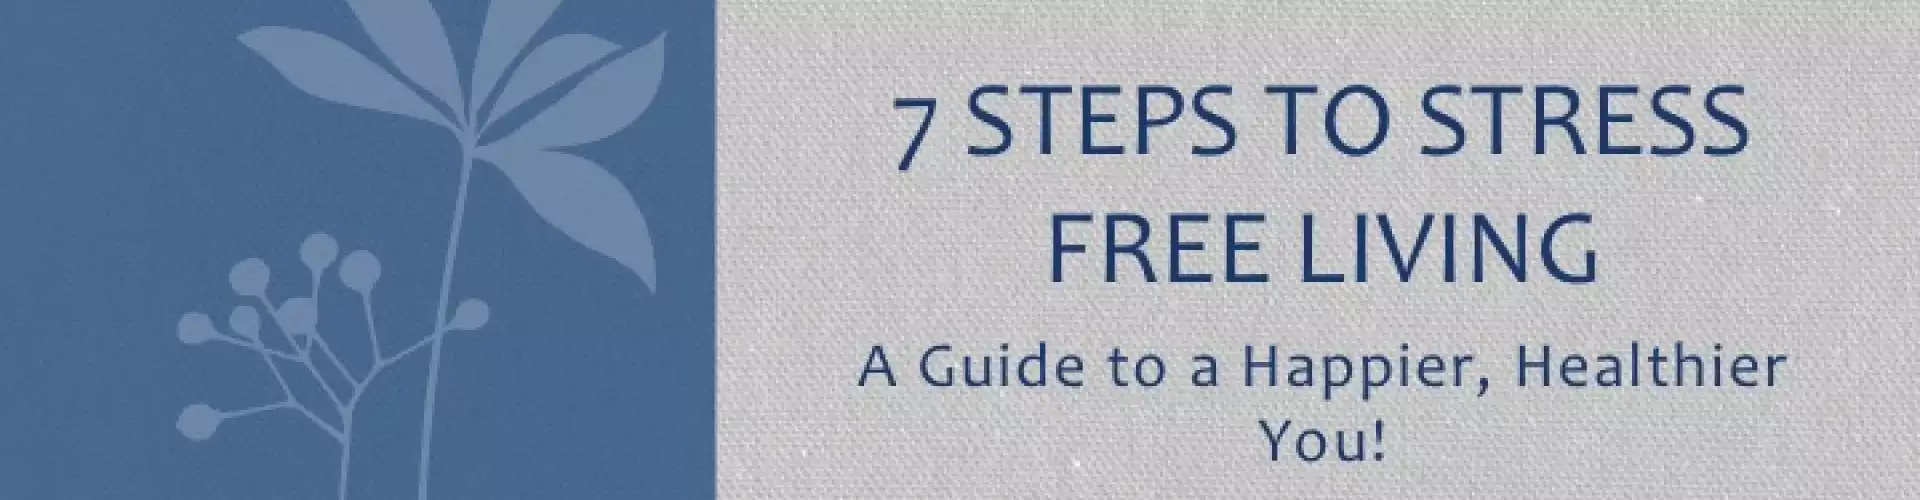 7 Steps to Stress Free Living - Multilingual